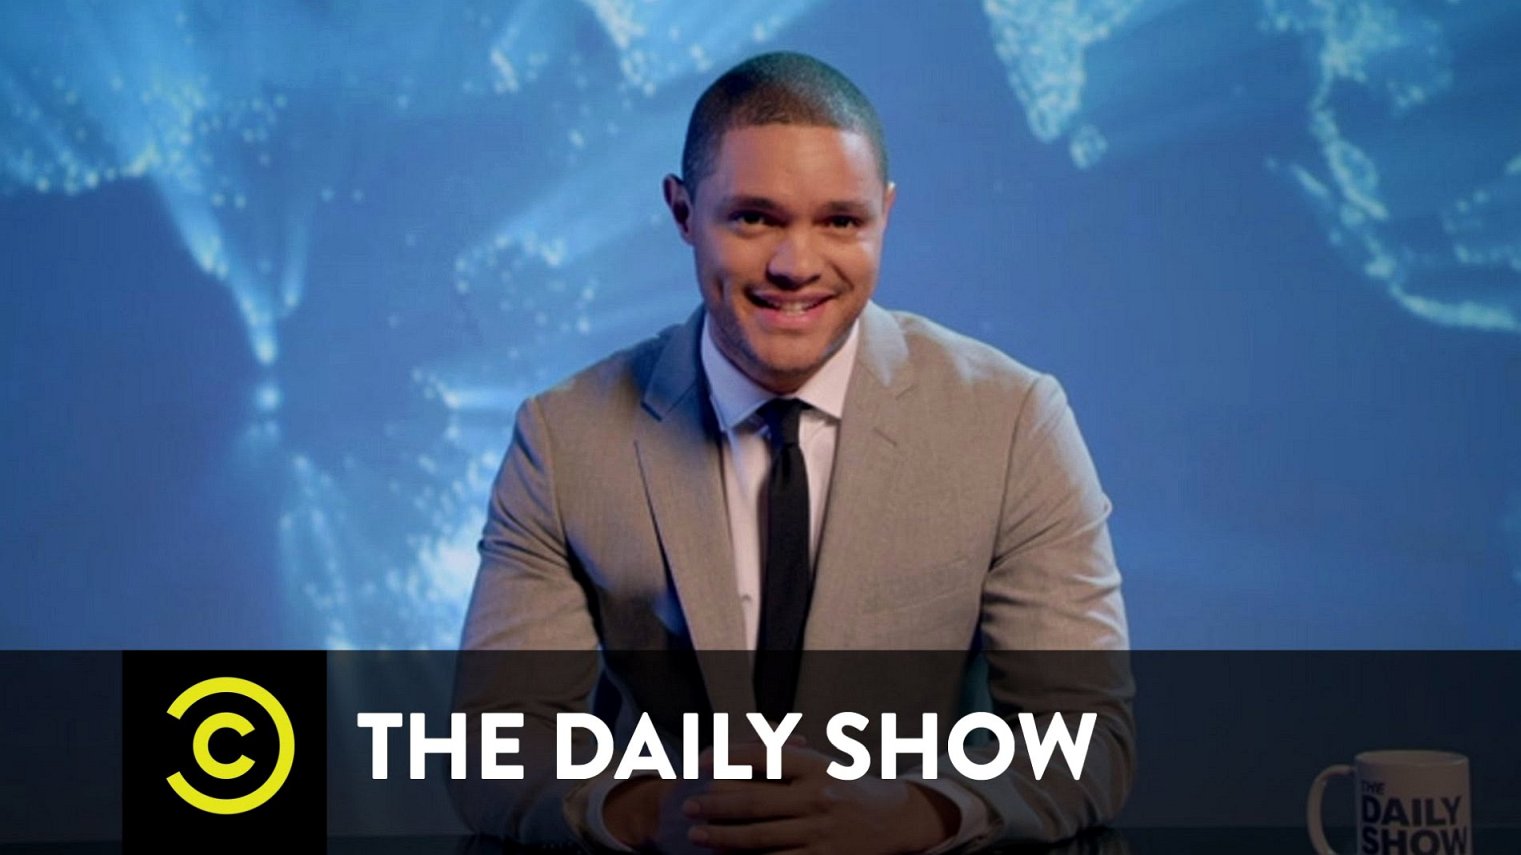 what time does The Daily Show come on